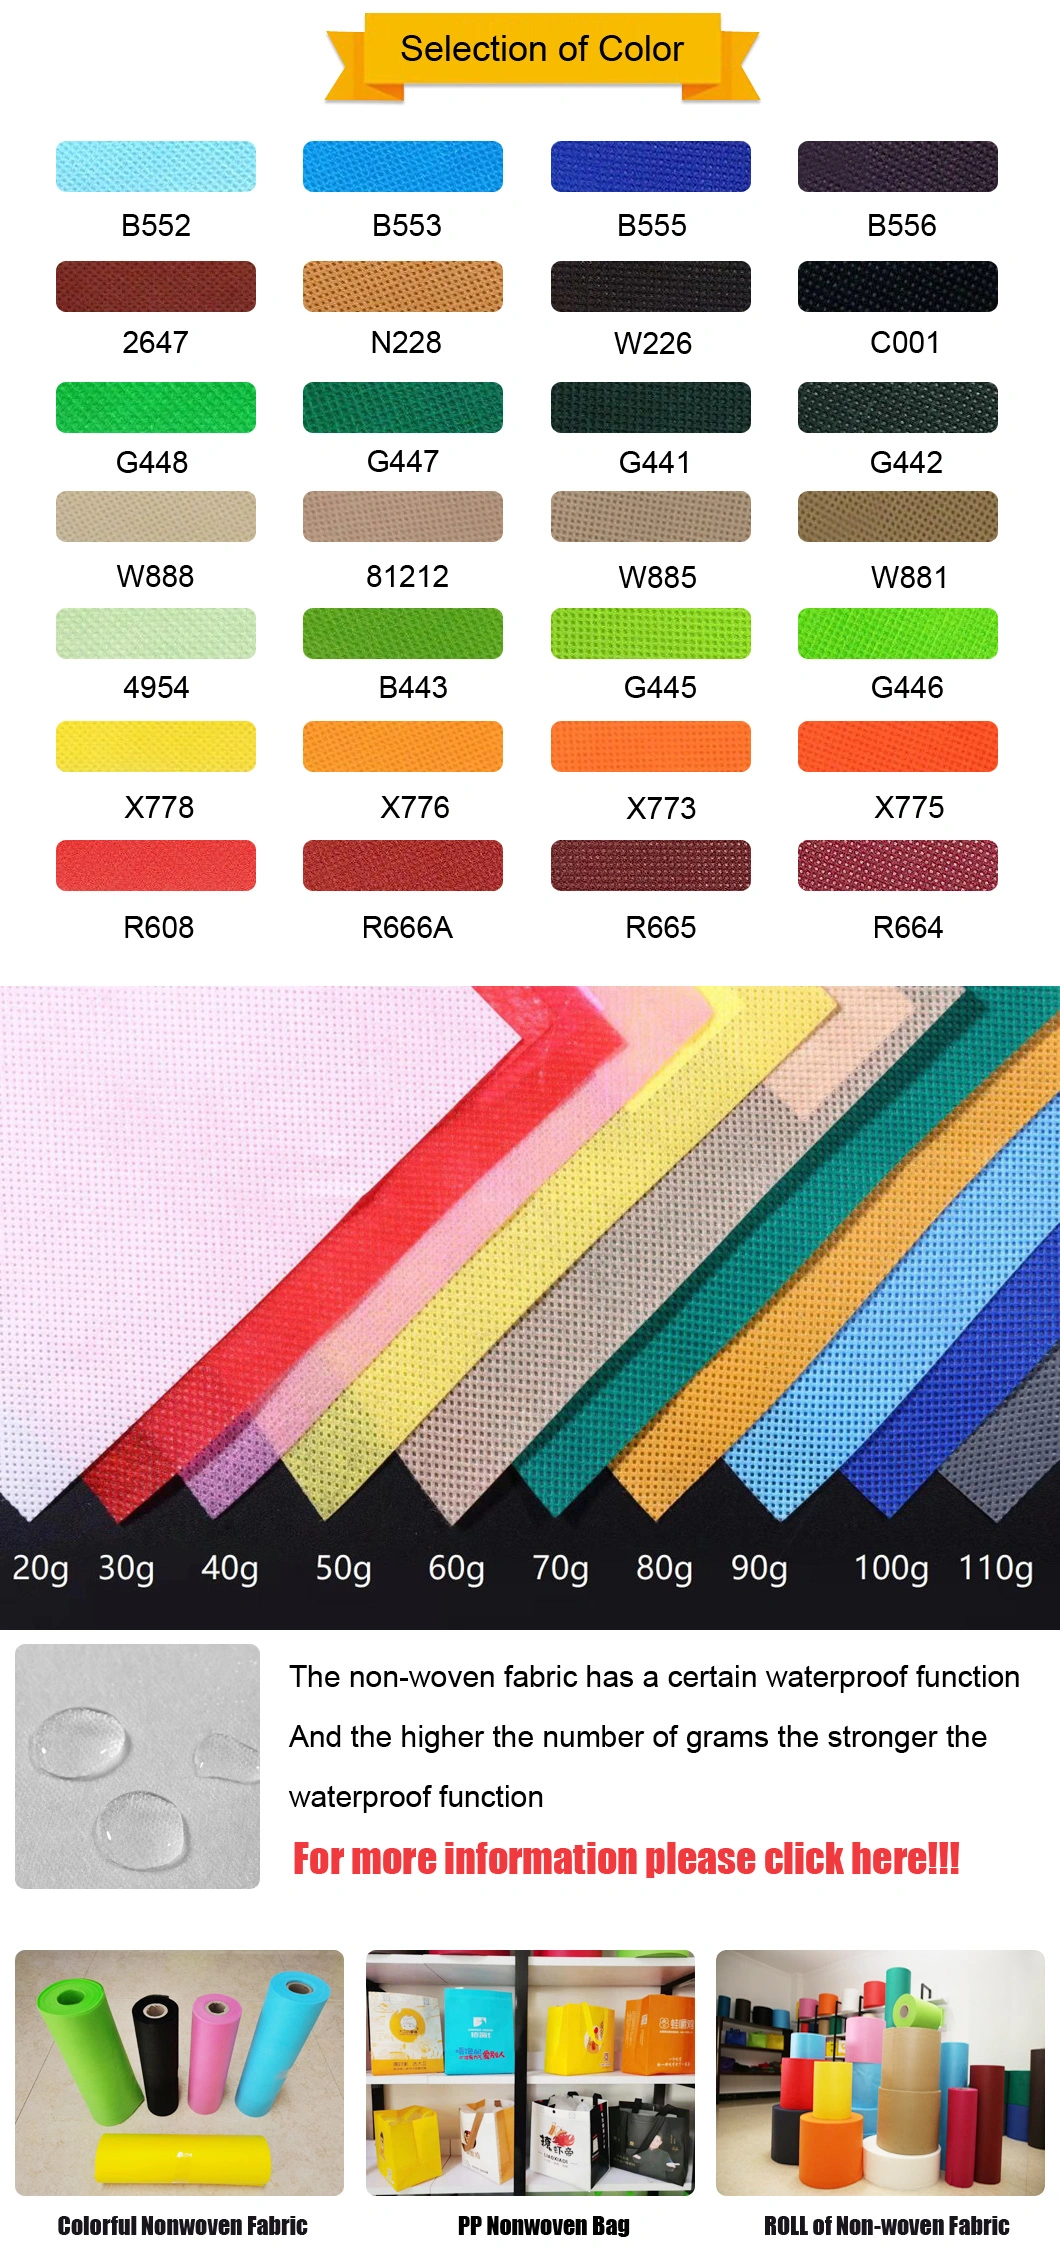 Home Textile Hollow High Quality Hemp Heavy Woven Weight Heart Fusible Double 400t Taffeta China Belt Products Fabric